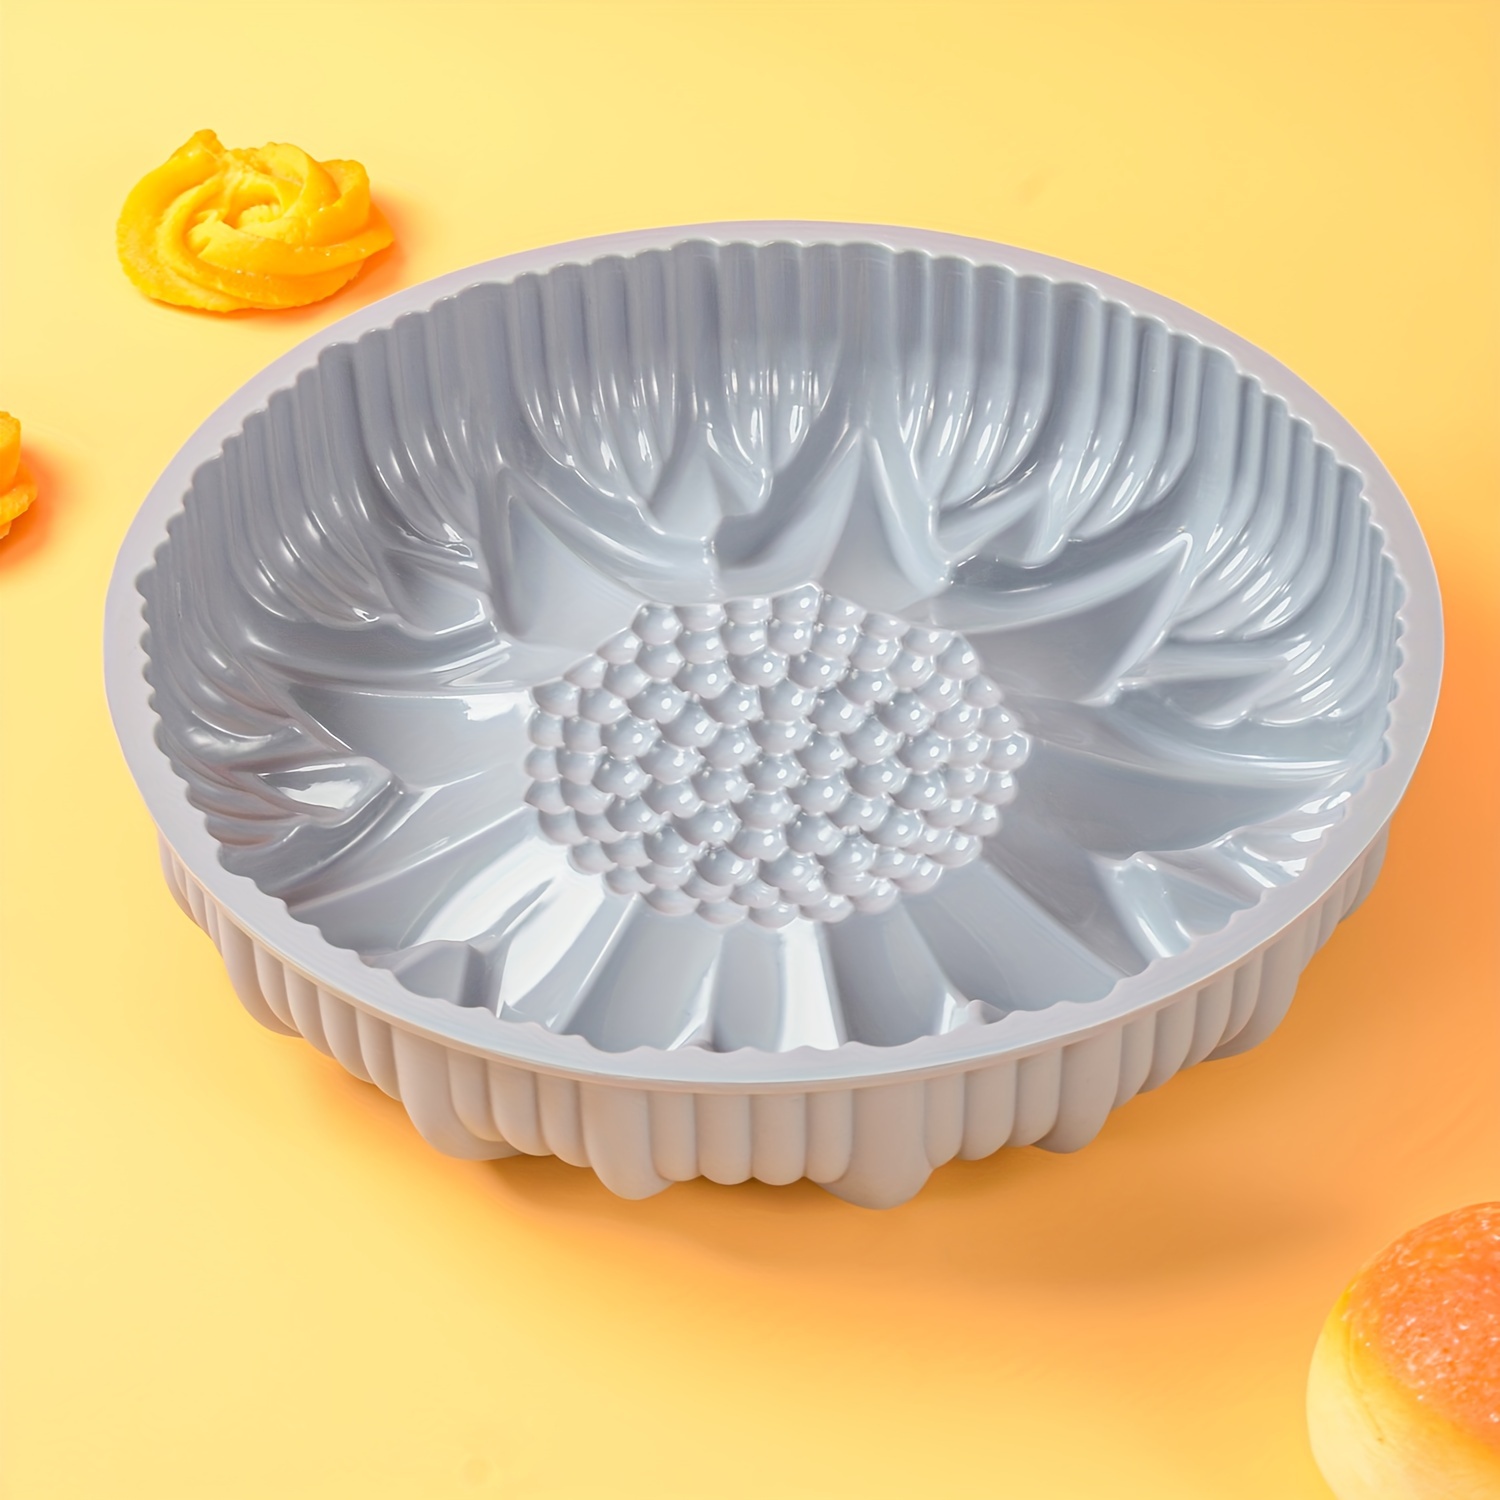 

1pc Silicone Flower Shape Cake Mold, Non-stick Round Sunflower Silicone Baking Pan, Soft And Easy To Release Mold, For Creative Cake, Gelatin, Chiffon Cake, Silicone Bakeware Tools